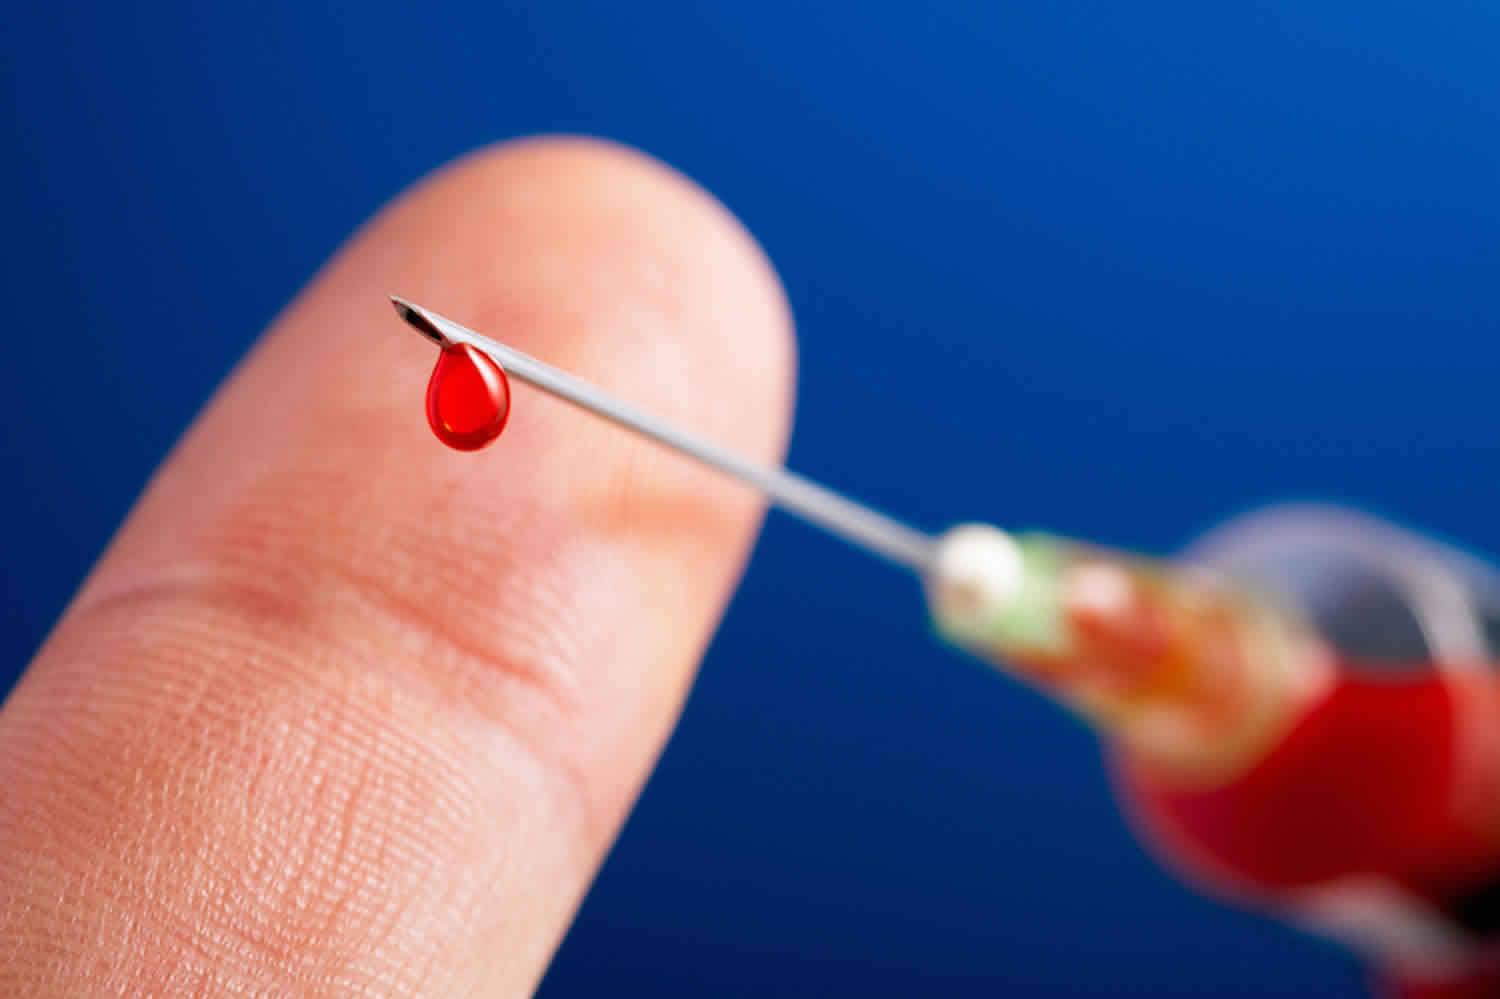 Why Current Safety Devices Are Not Solving the Needlestick Issue